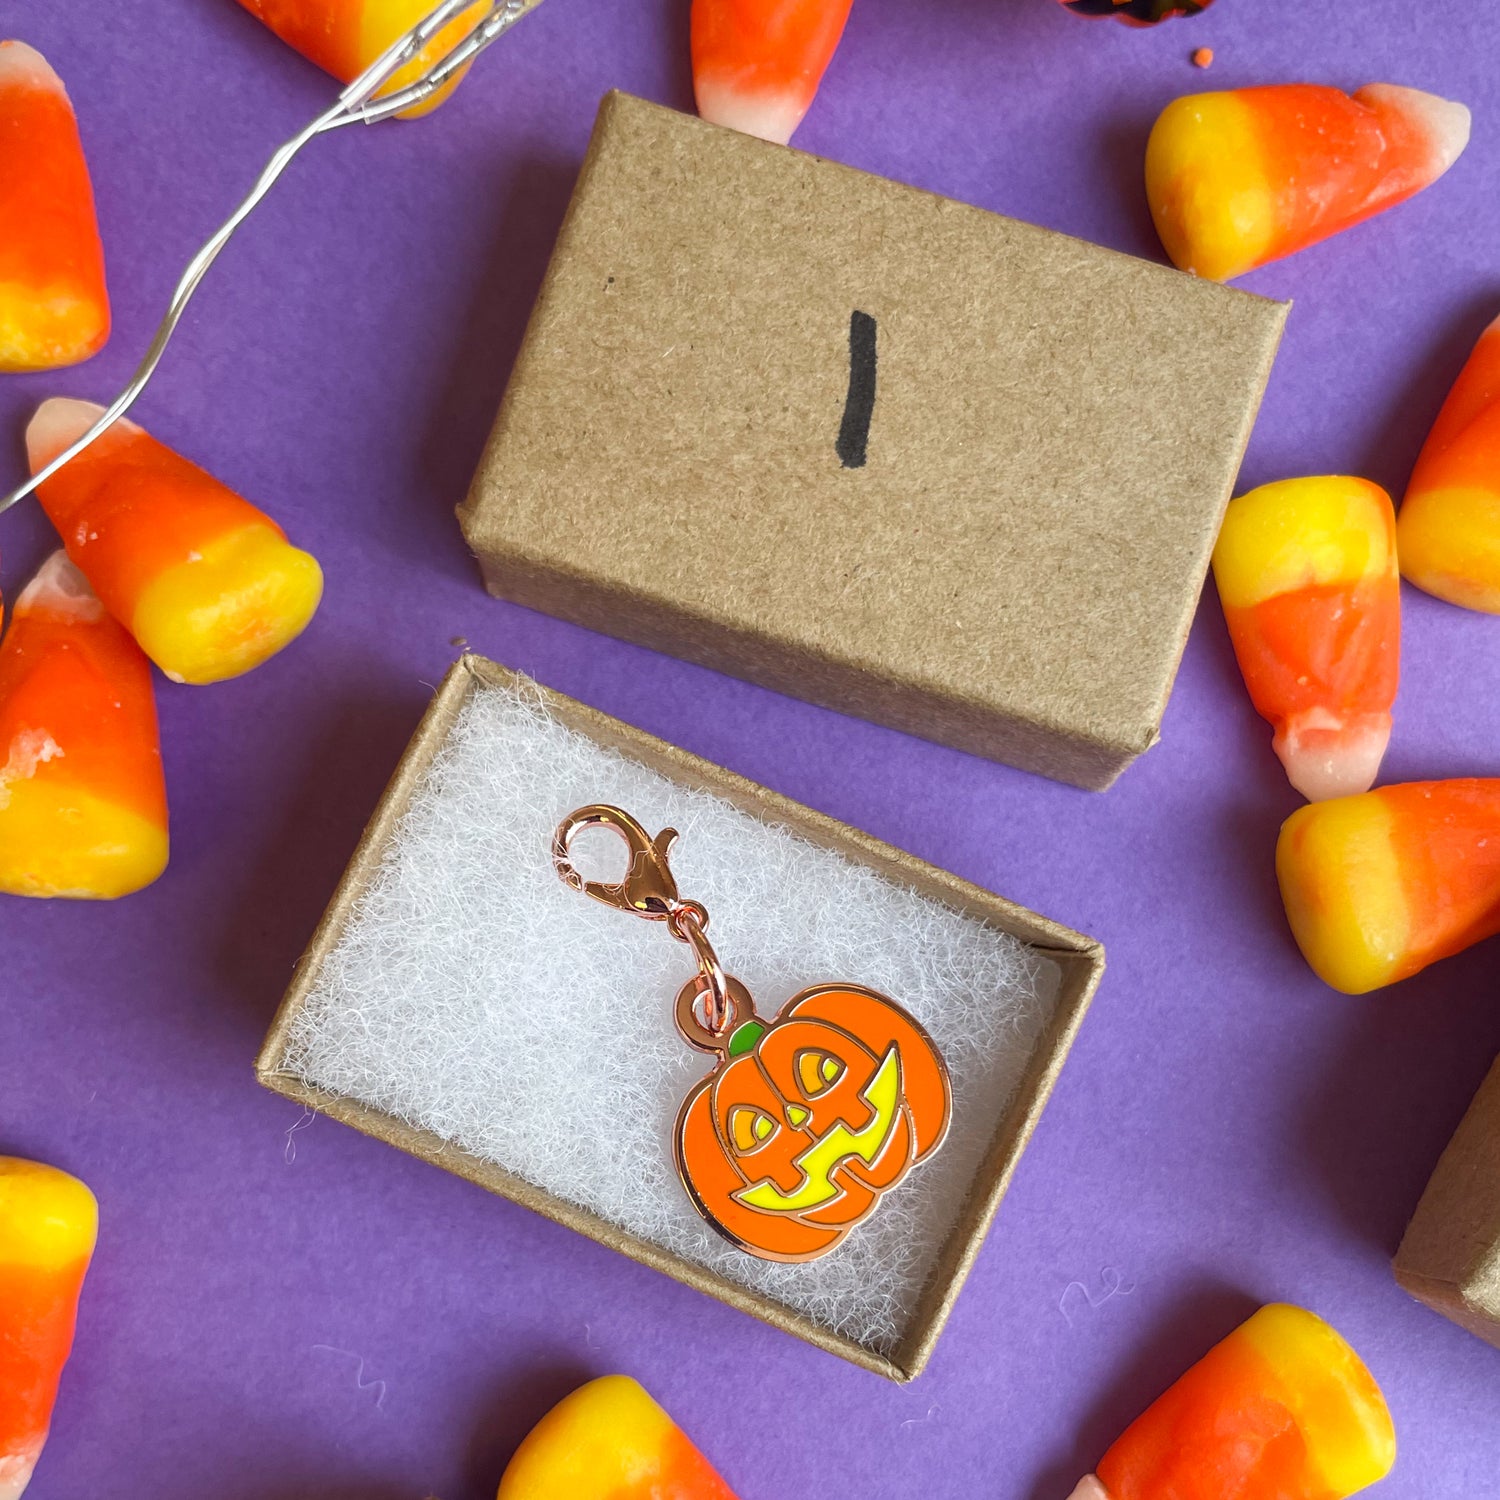 A Kraft paper box with a 1 on it the box contains a charm with a lobster claw clasp shaped like a jack-o-lantern. The box is on purple paper scattered with candy corn.